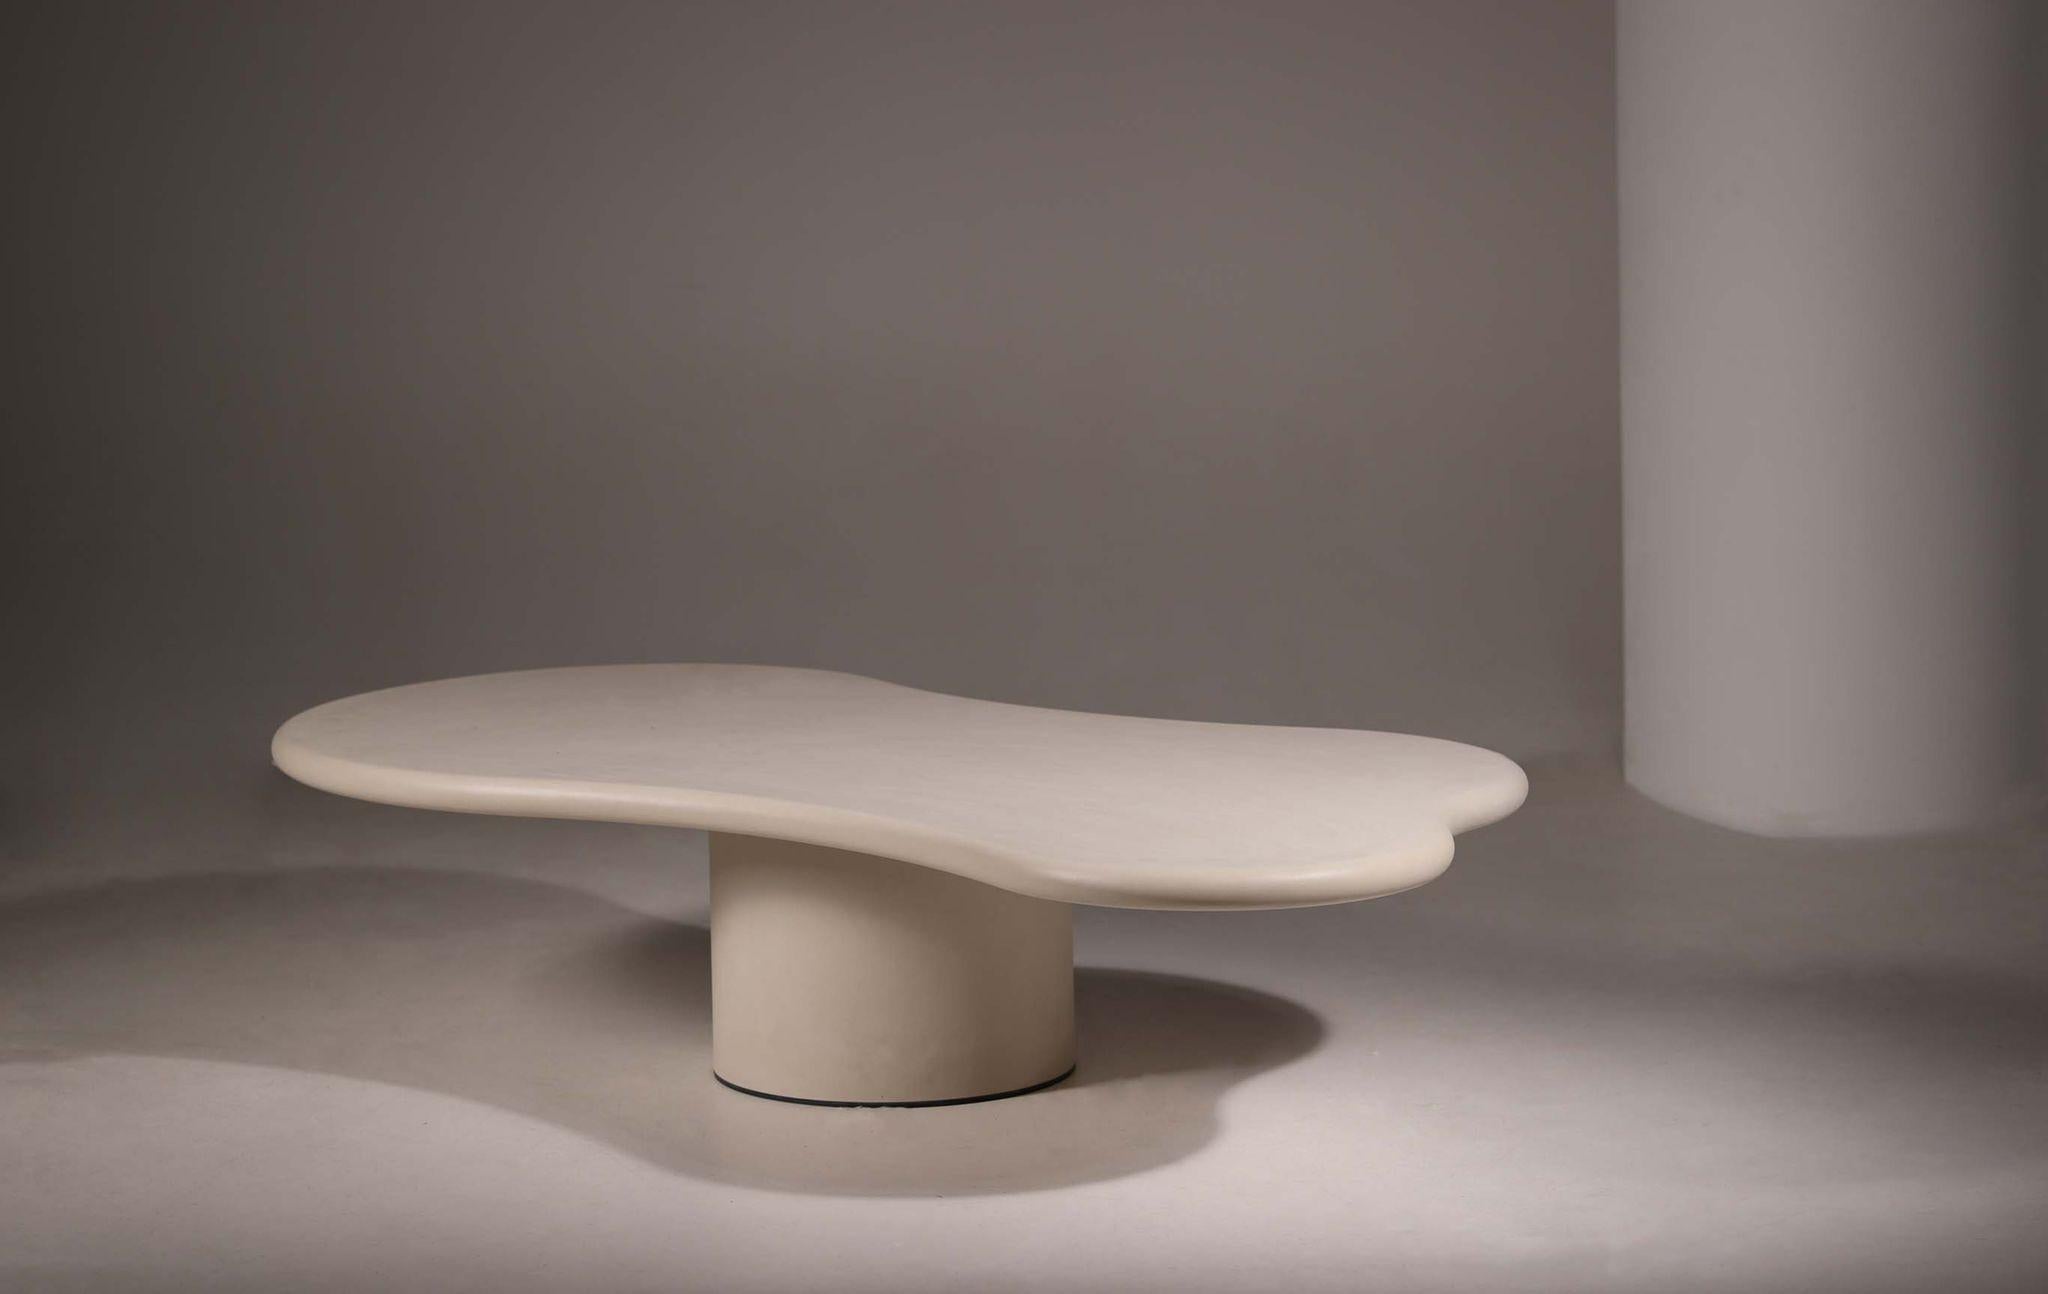 Handmade Rock-Shaped Natural Plaster Table Set by Galerie Philia Edition 1